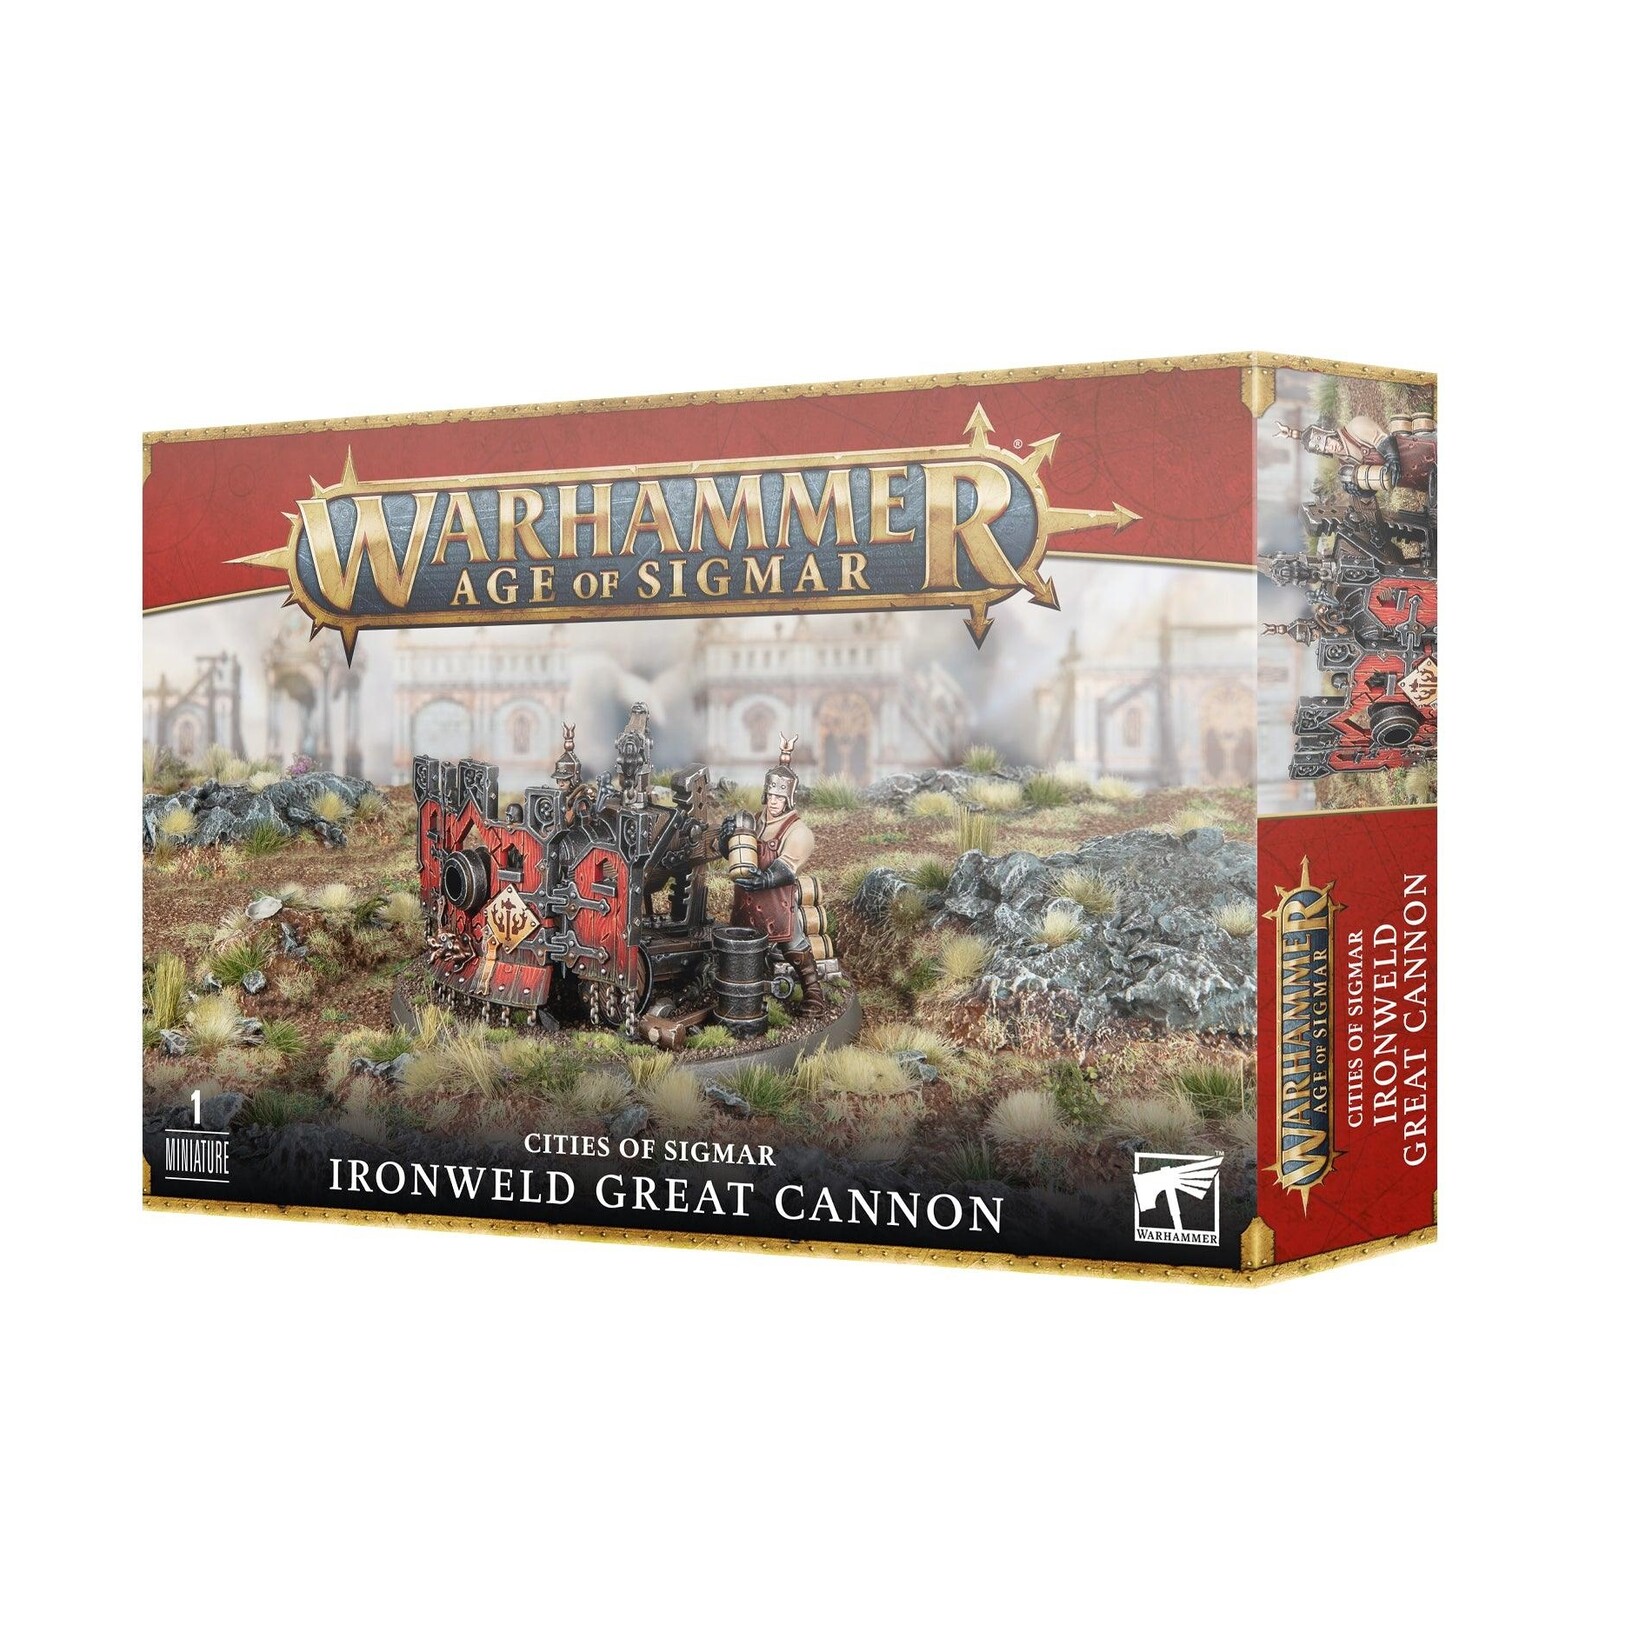 Warhammer: age of sigmar Cities of Sigmar: Ironweld Great Cannon